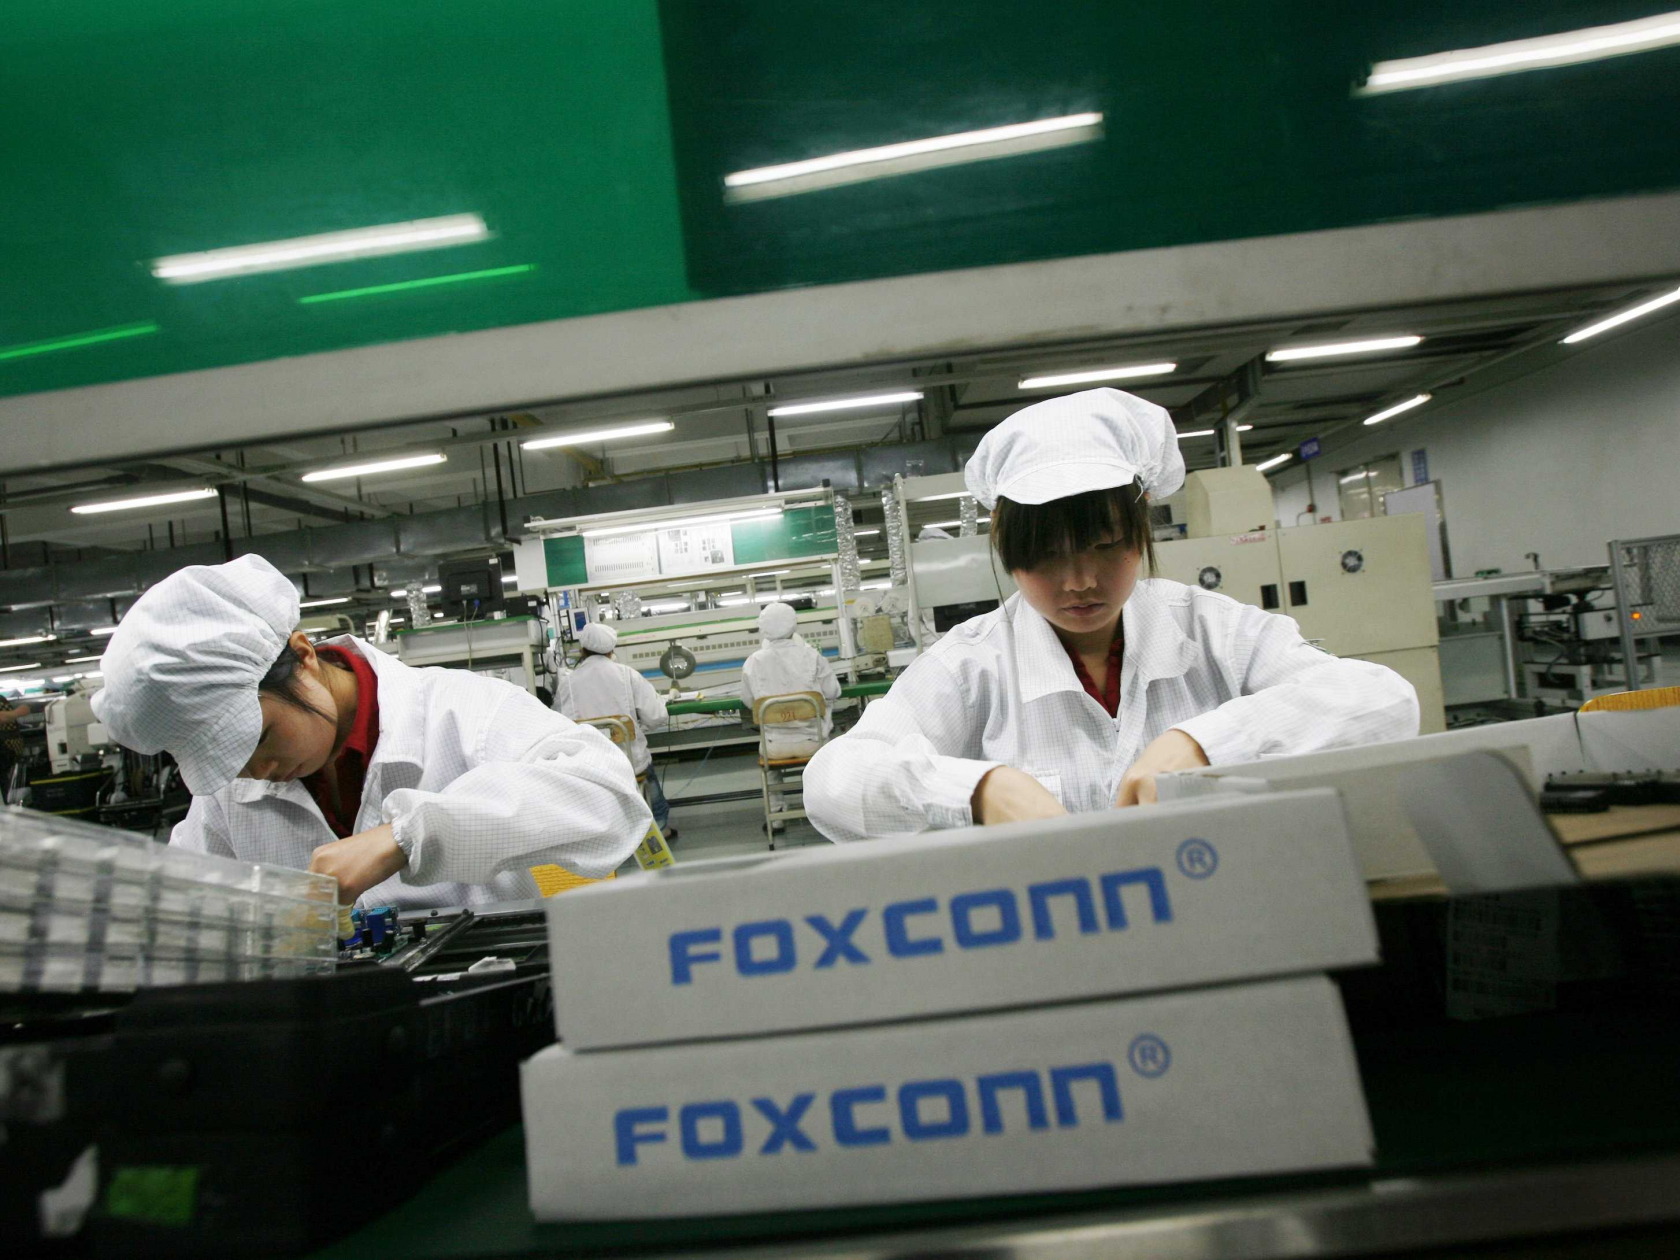 Foxconn axes thousands of seasonal workers early in wake of falling iPhone demand, misses job creation targets in Wisconsin